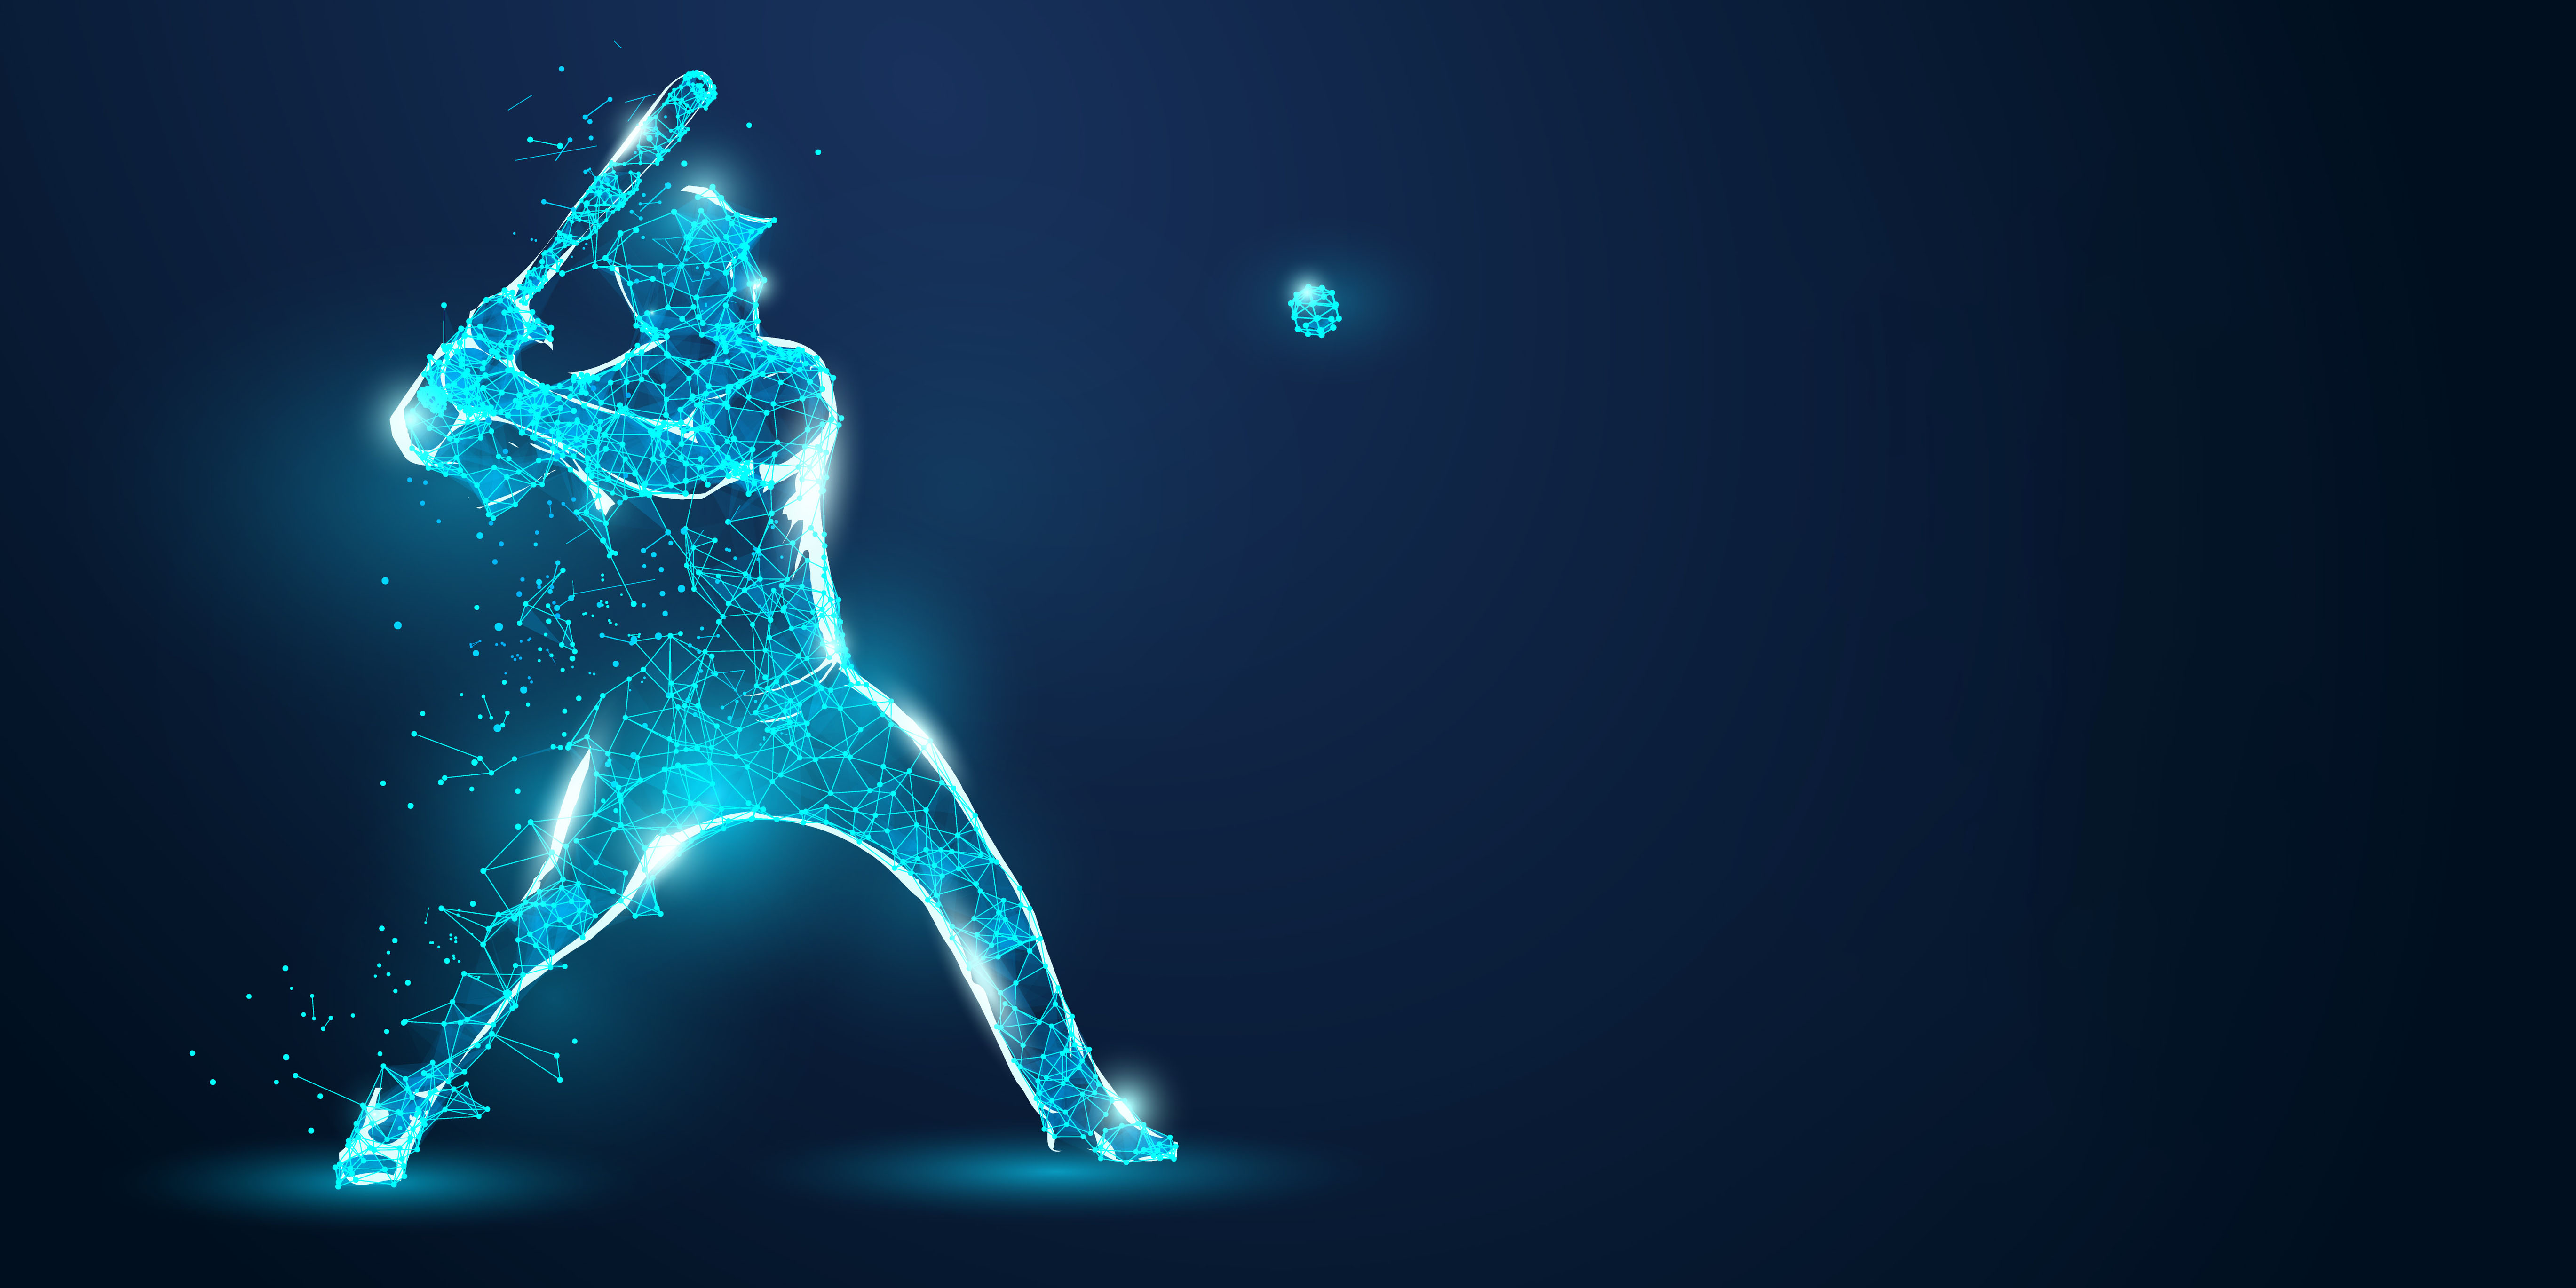 Abstract baseball player from particles, lines and triangles on blue background. All elements on a separate layers, color can be changed to any other. Low poly neon wire outline geometric. Vector